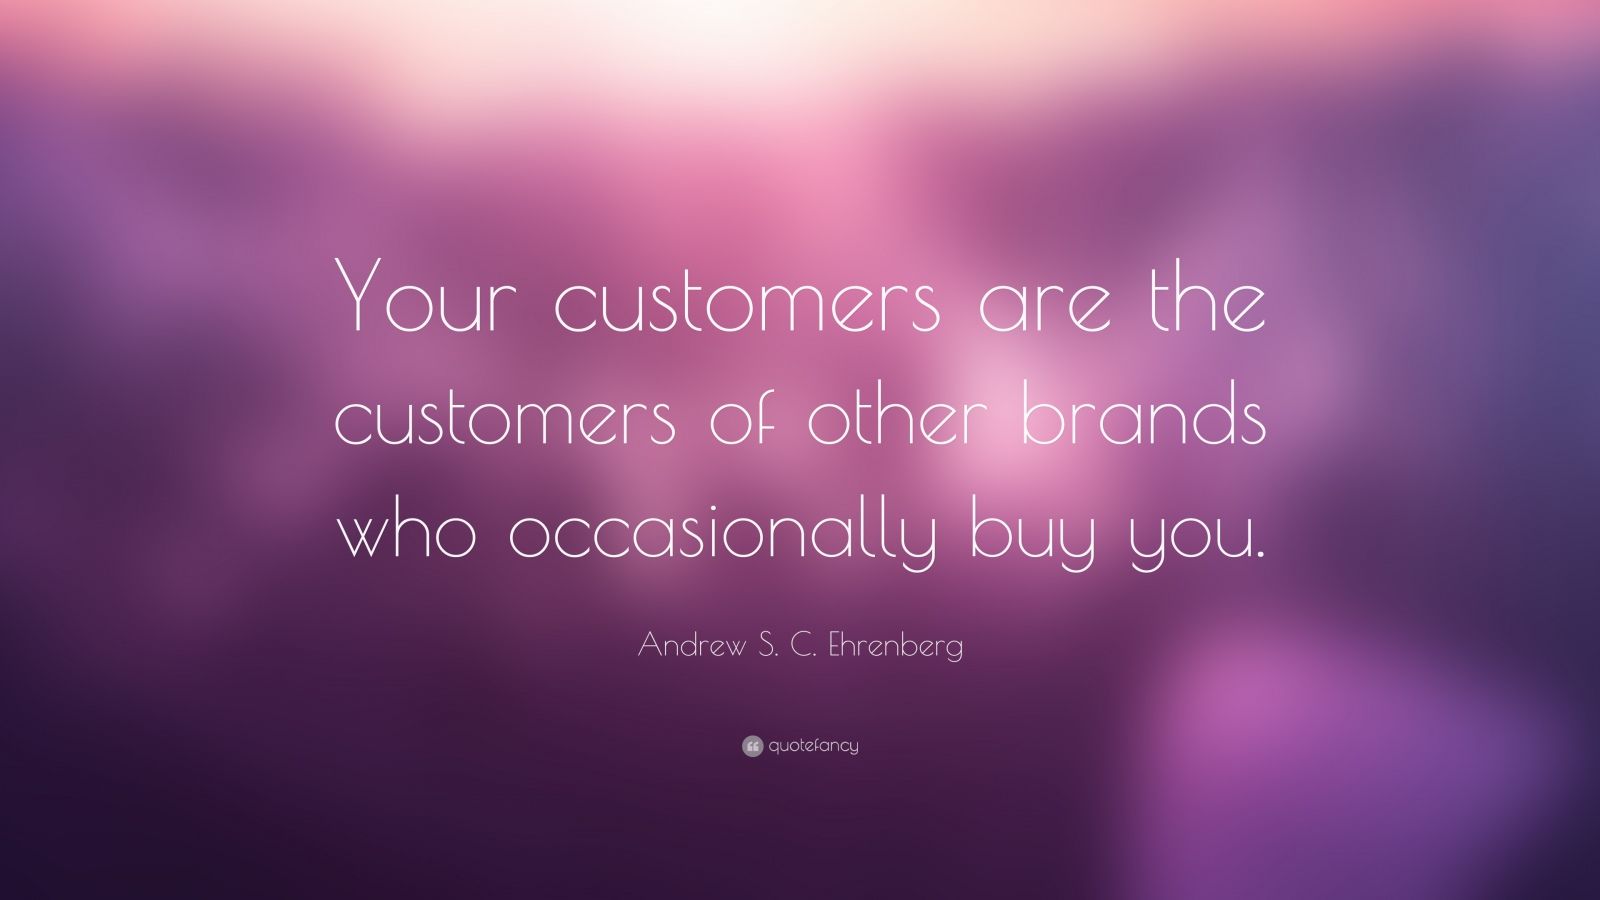 Quotes to attract customers